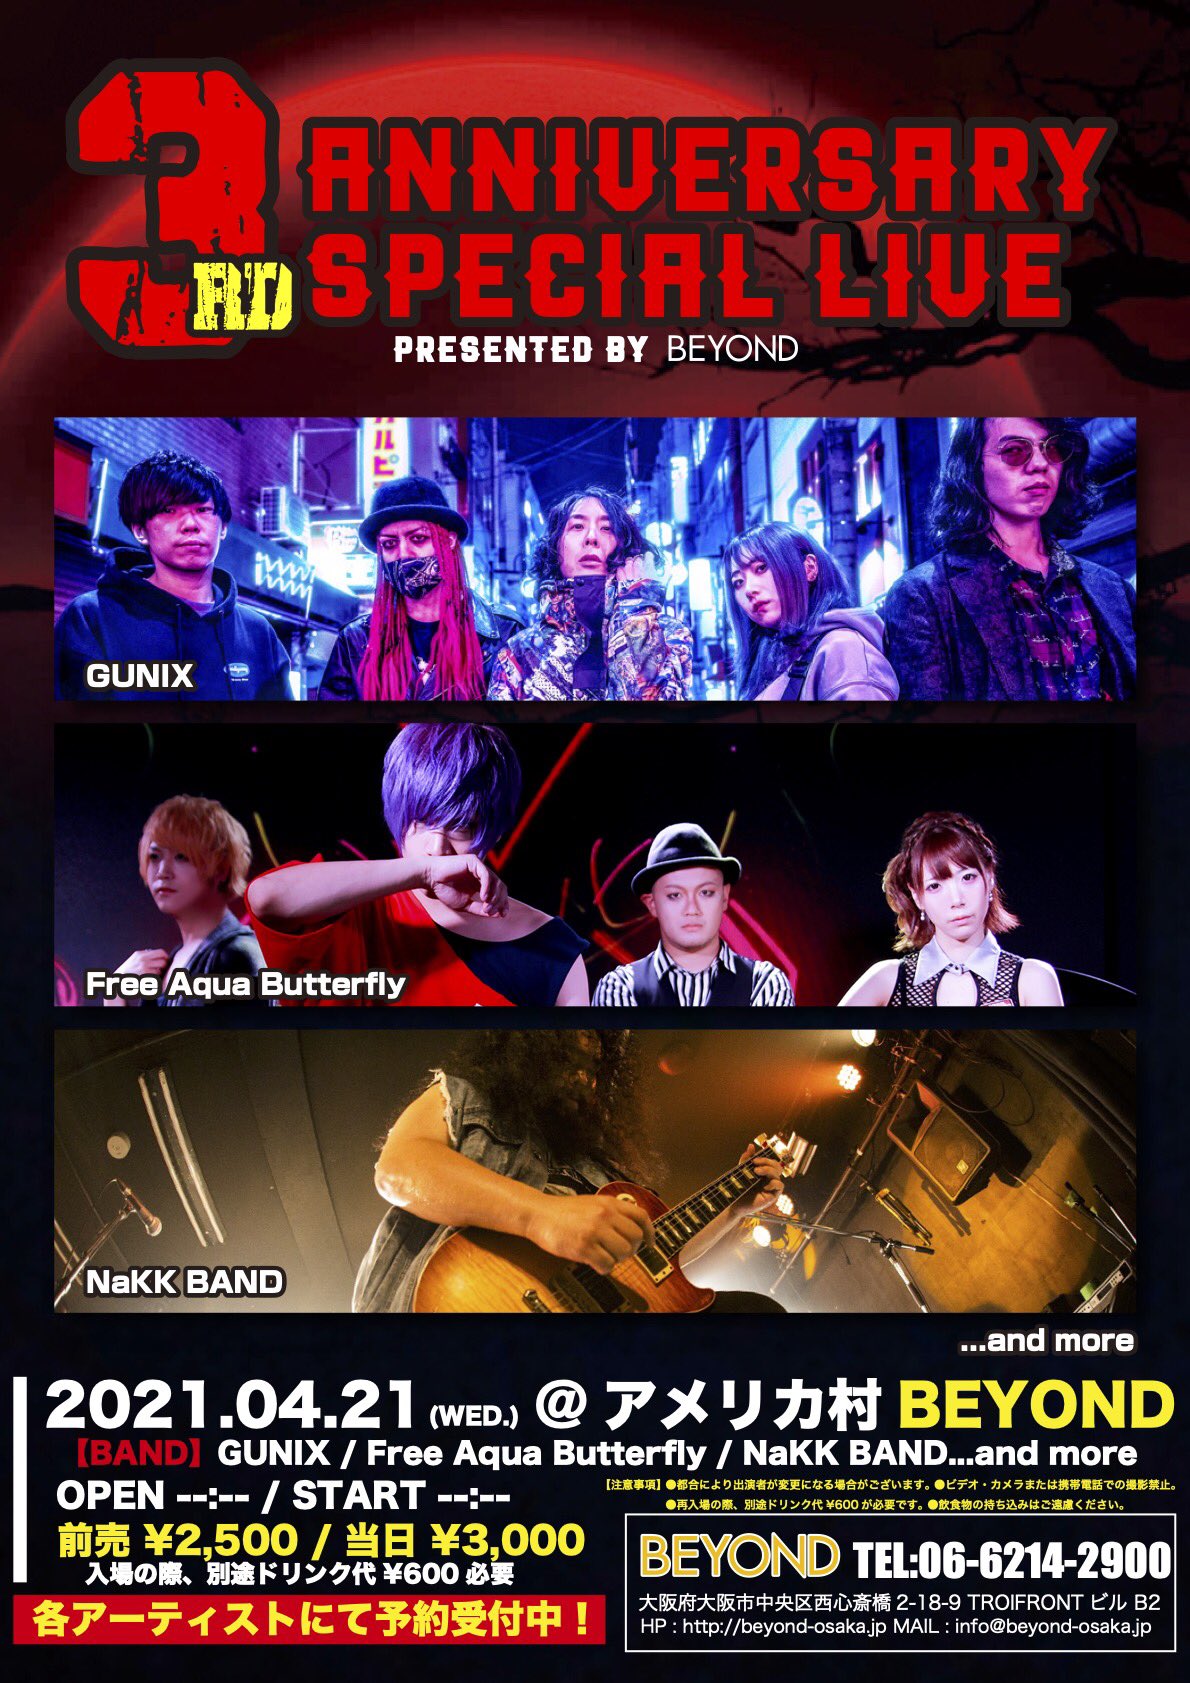 『3rd ANNIVERSARY SPECIAL LIVE 』presented by BEYOND